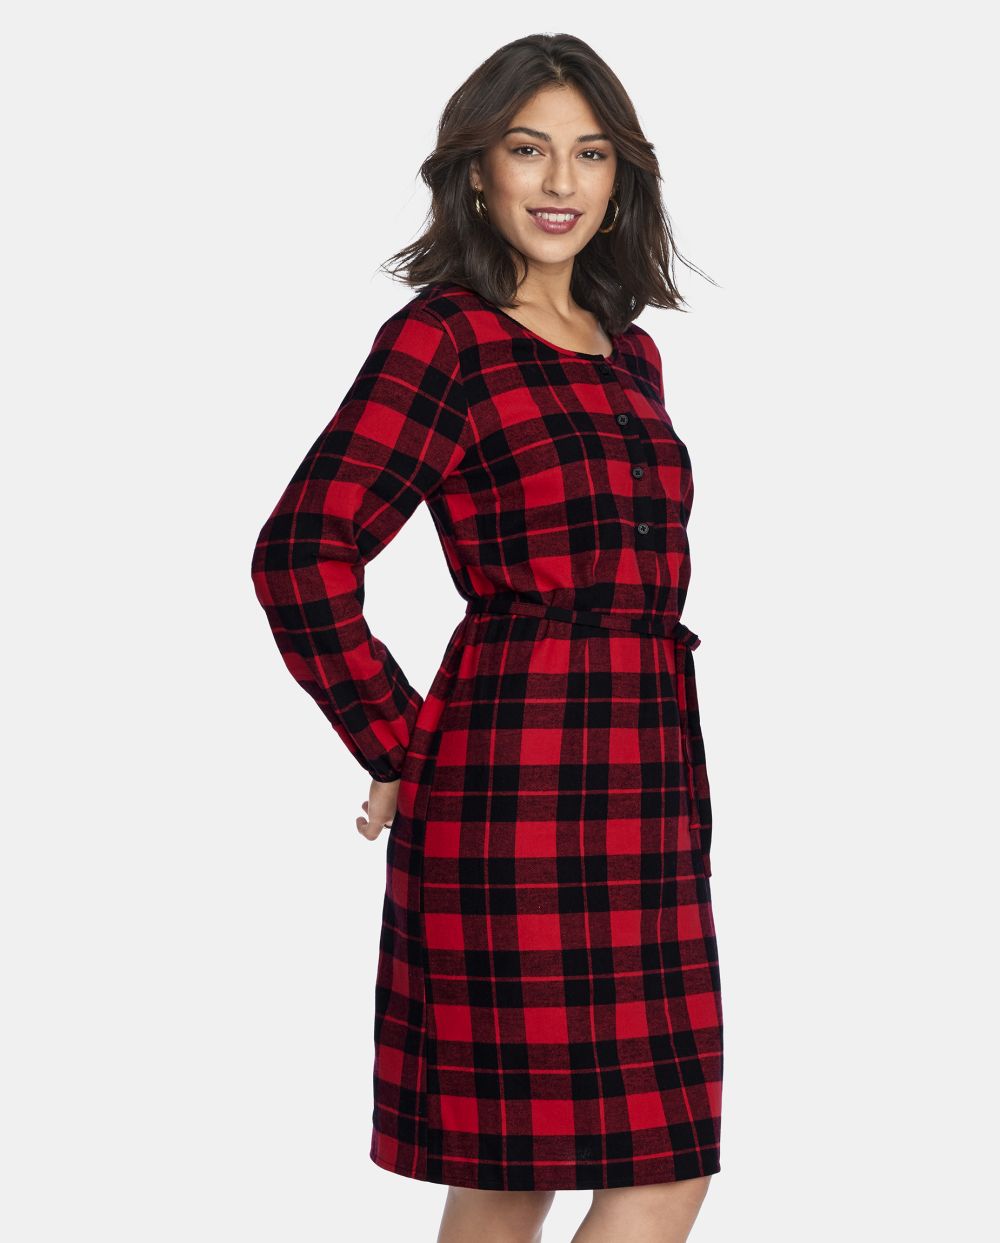 Above the Knee Plaid Print Tie Waist Waistline Crew Neck Long Sleeves Belted Self Tie Button Front Shirt Dress